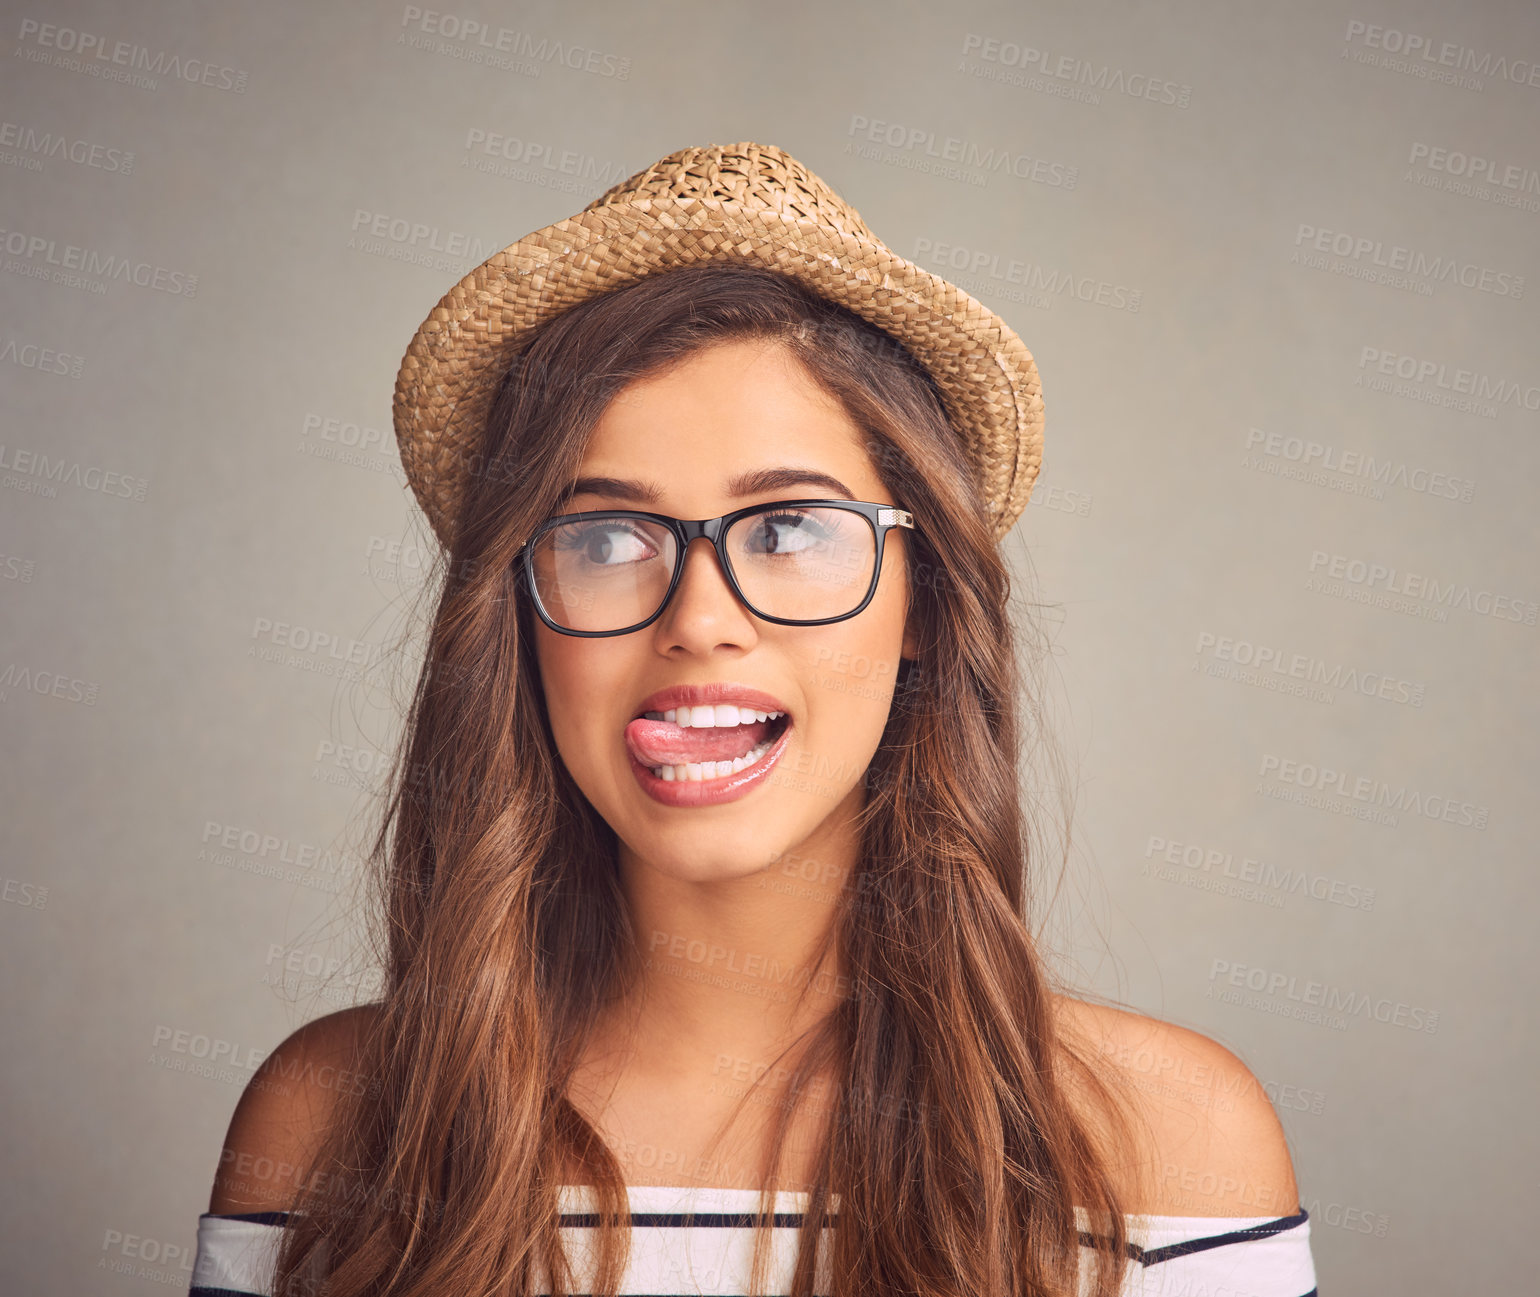 Buy stock photo Studio shot of an attractive young woman playfully sticking out her tongue against a gray background